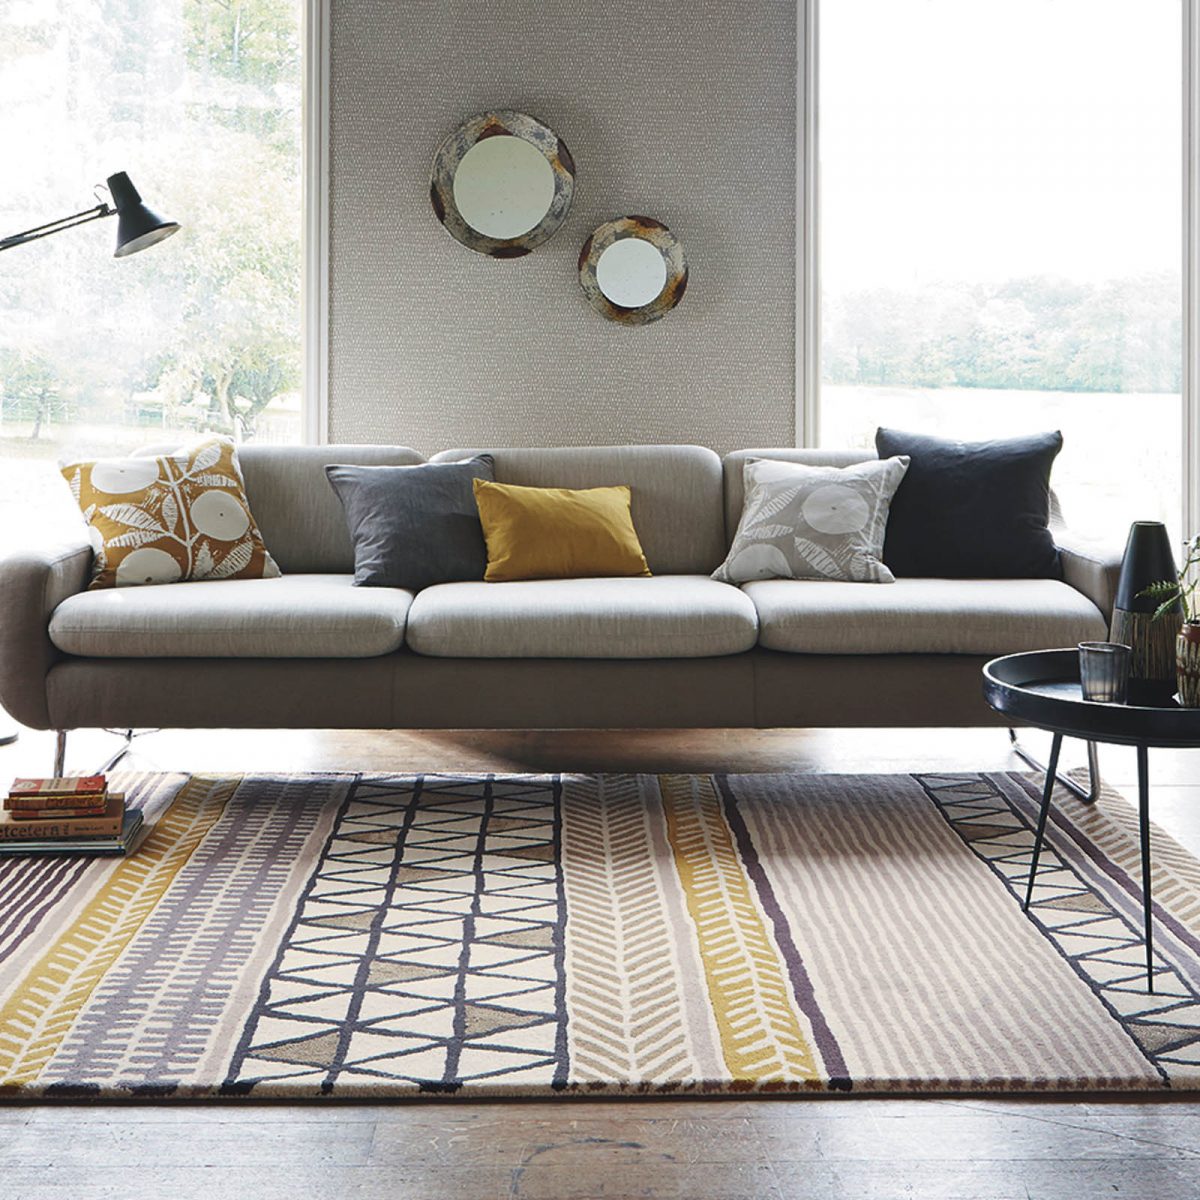 Stylish Ways to Decorate Your Living Room with Modern Rugs 2